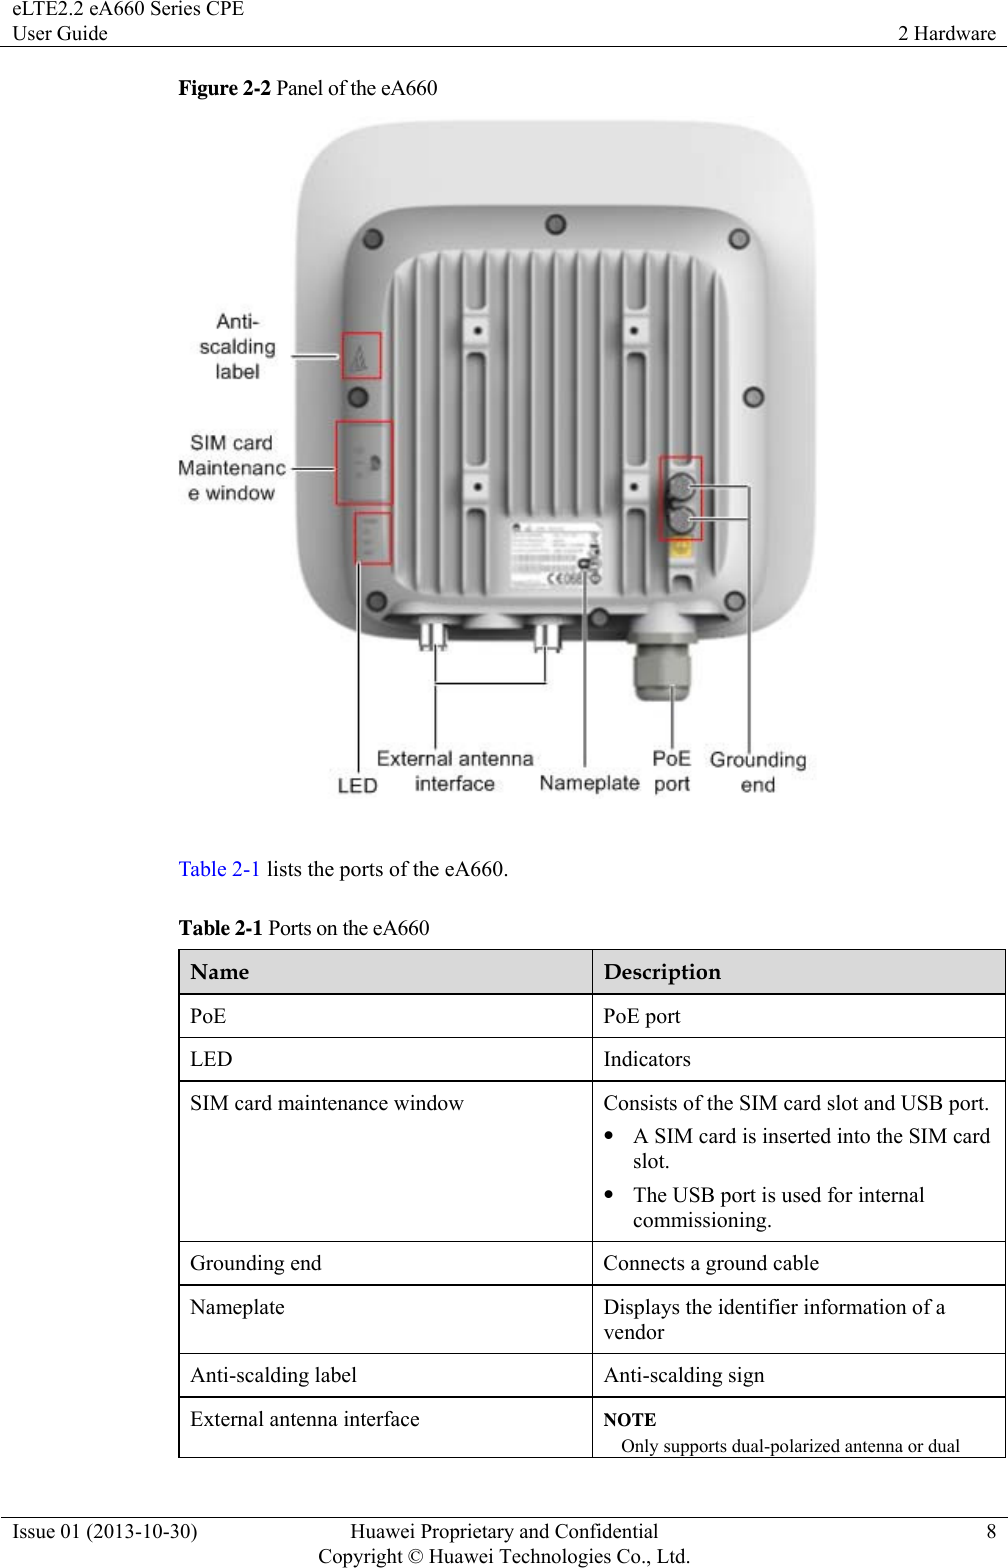 eLTE2.2 eA660 Series CPE User Guide  2 Hardware Issue 01 (2013-10-30)  Huawei Proprietary and Confidential         Copyright © Huawei Technologies Co., Ltd.8 Figure 2-2 Panel of the eA660   Table 2-1 lists the ports of the eA660. Table 2-1 Ports on the eA660 Name  Description PoE PoE port LED Indicators SIM card maintenance window  Consists of the SIM card slot and USB port.z A SIM card is inserted into the SIM card slot. z The USB port is used for internal commissioning. Grounding end  Connects a ground cable Nameplate  Displays the identifier information of a vendor Anti-scalding label  Anti-scalding sign External antenna interface  NOTE Only supports dual-polarized antenna or dual 